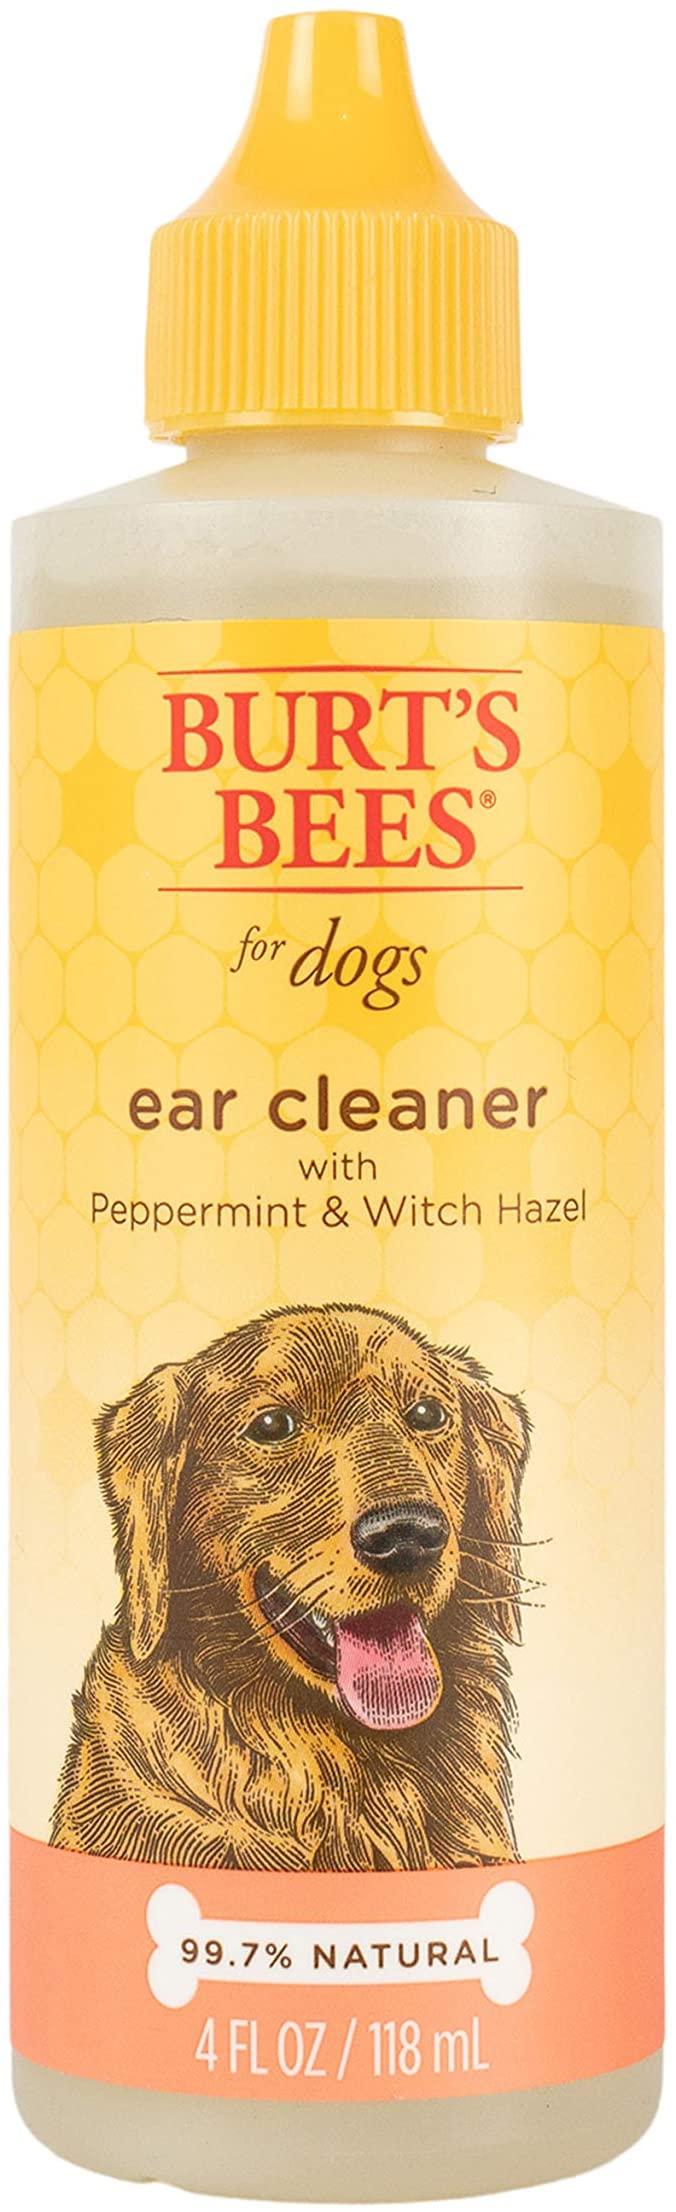 Burt’s Bees® Ear Cleaner for Dogs